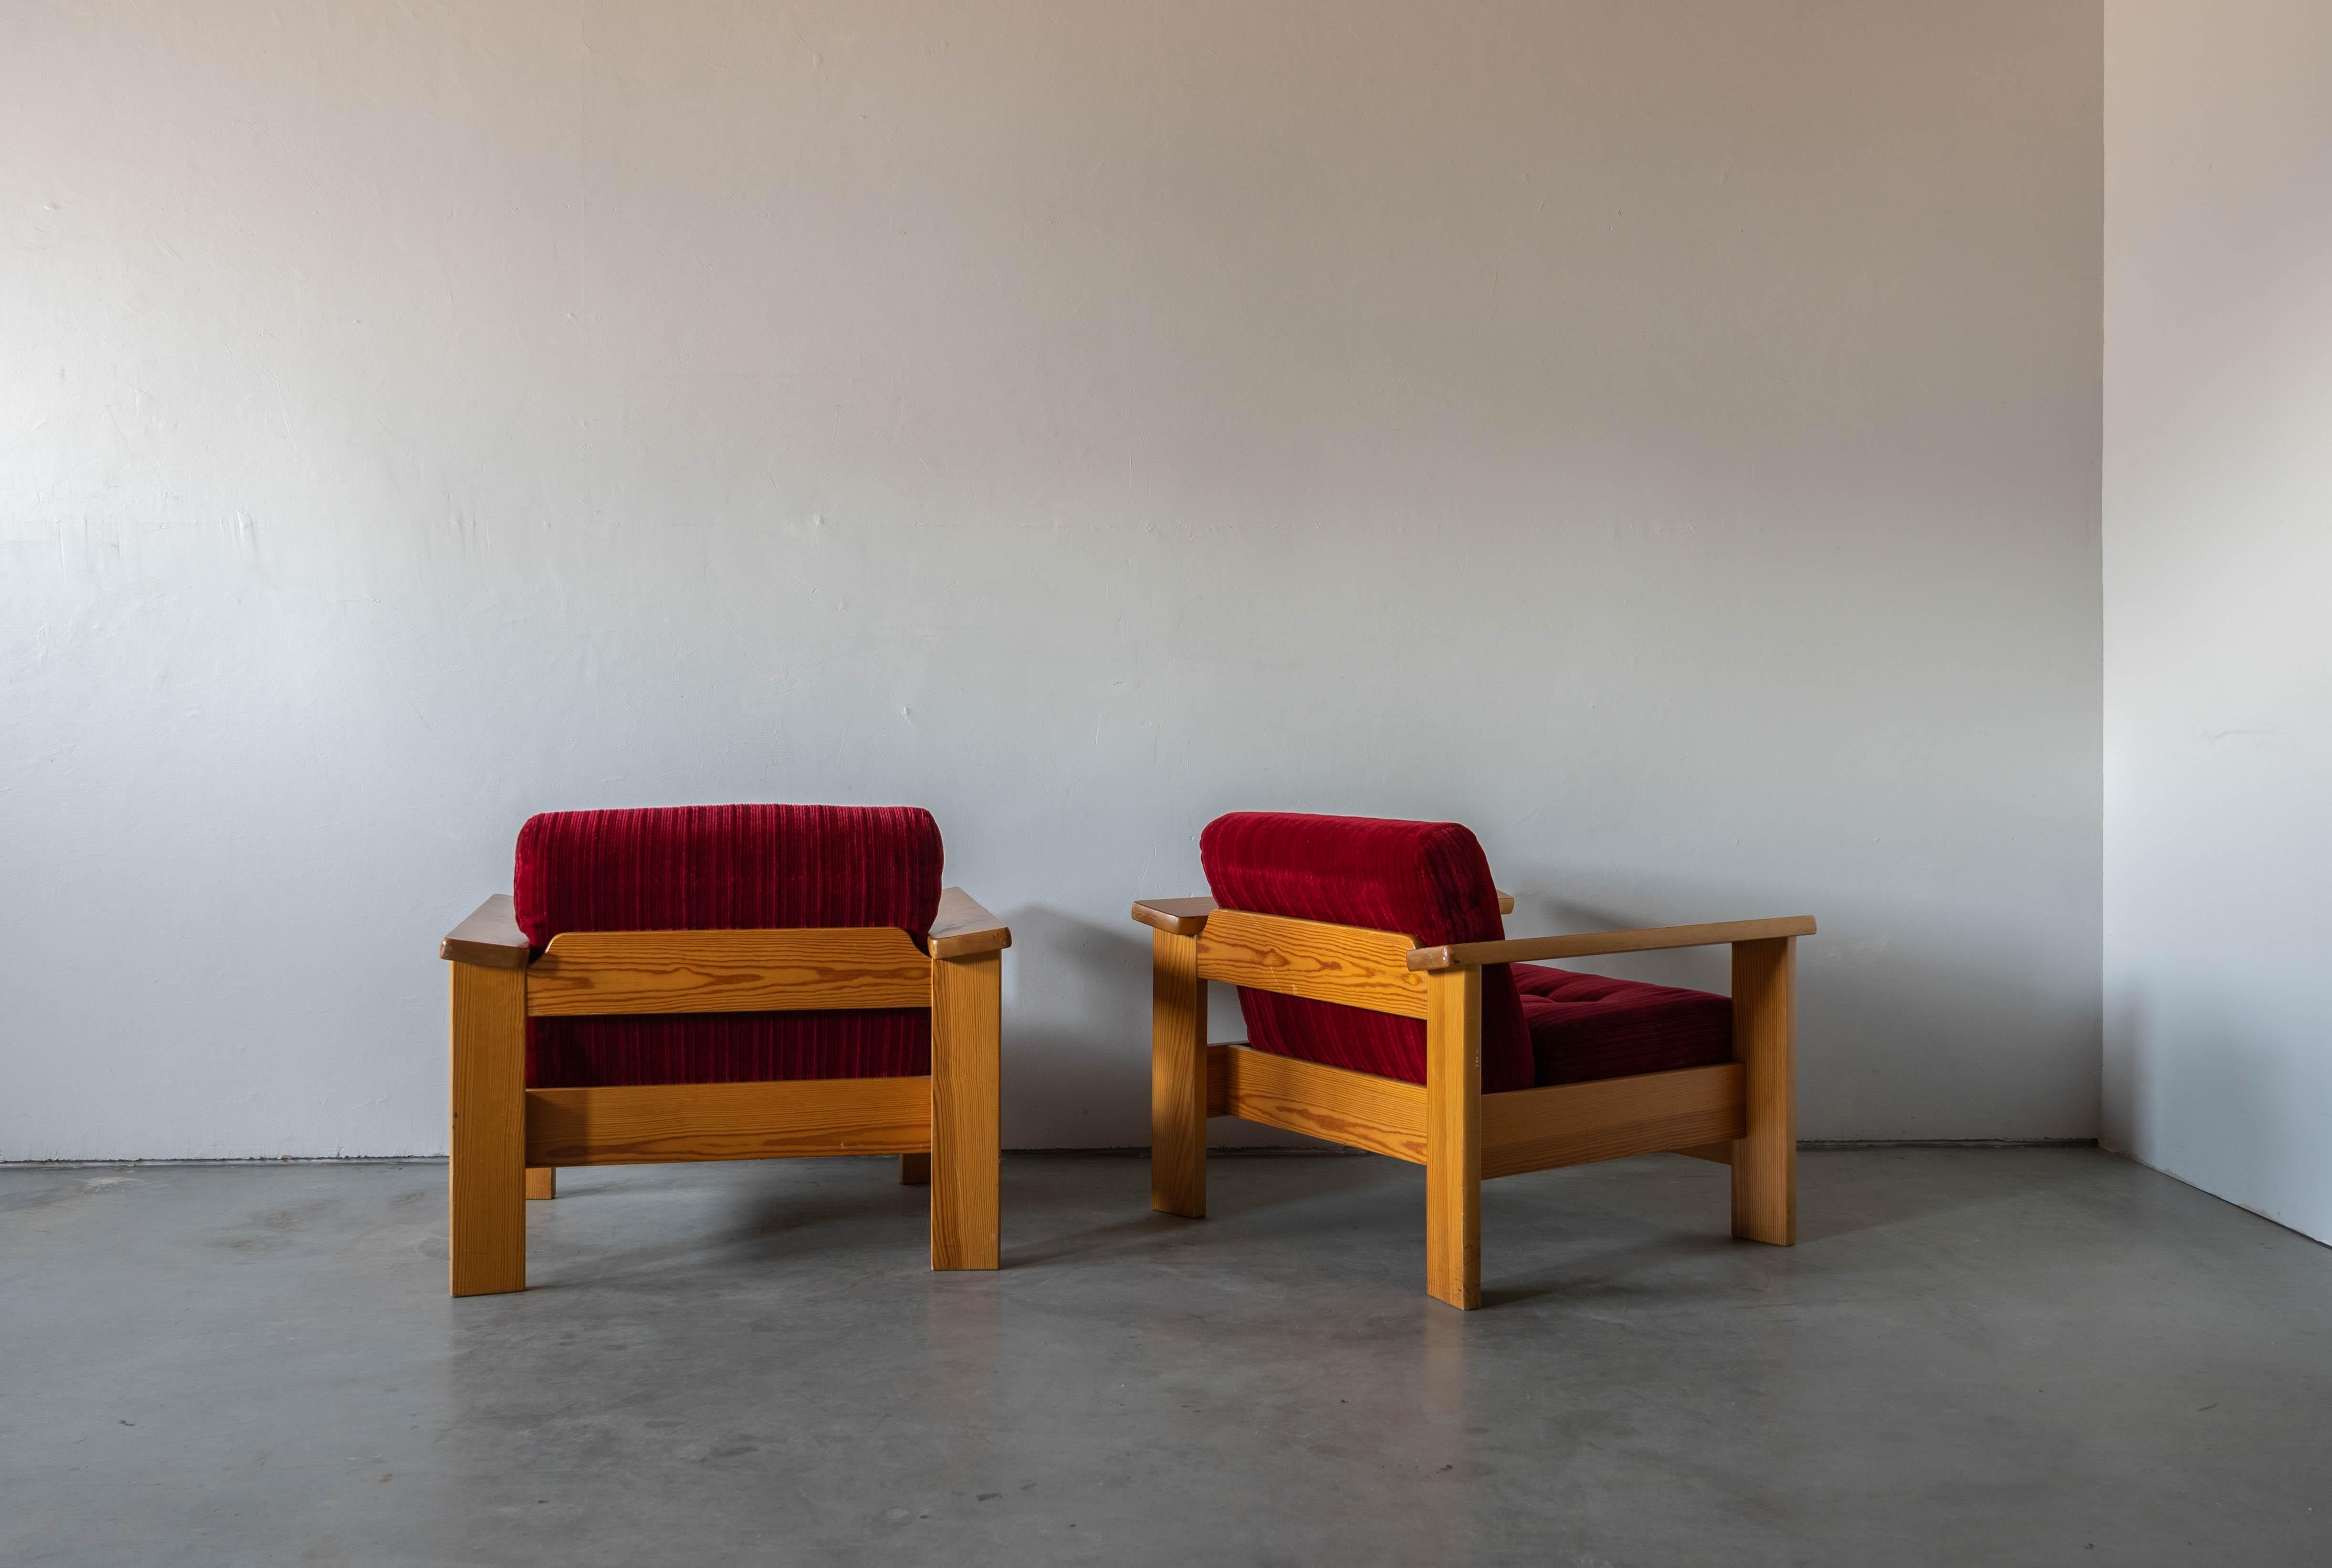 Danish Swedish Designer, Lounge Chairs, Solid Pine, Fabric, Sweden, 1970s For Sale